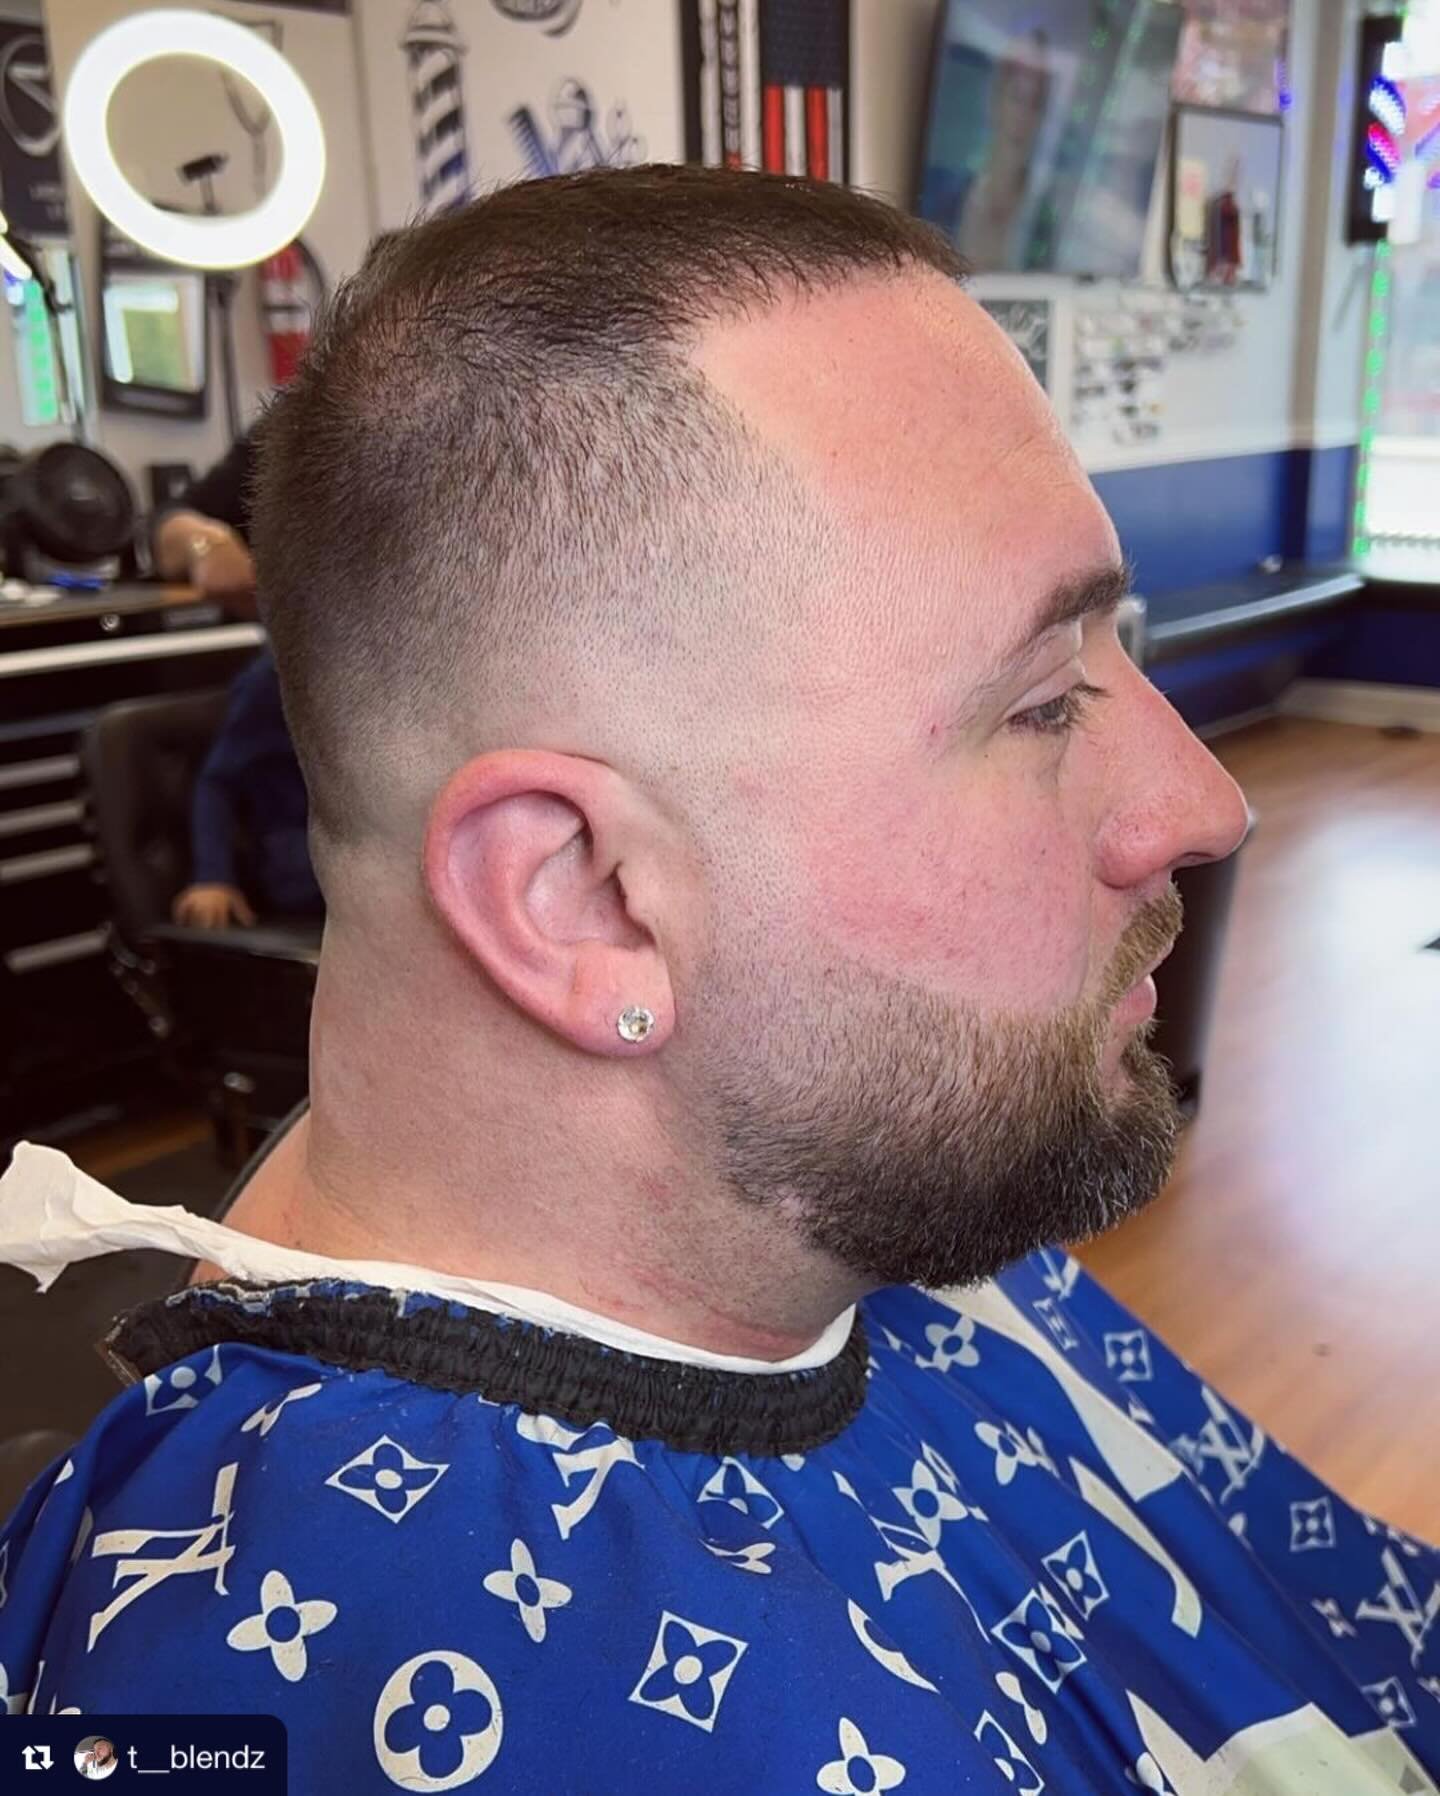 Repost from @t__blendz
&bull;
#barber #barbers #barbershop #barberlife #barberlove #barberworld #barbergang #barbernation #barberpost #barberstyle #barberart #barberhustle #andis #wahl #babylisspro #gamma #stylecraft #jrlclippers #providence #rhodeis